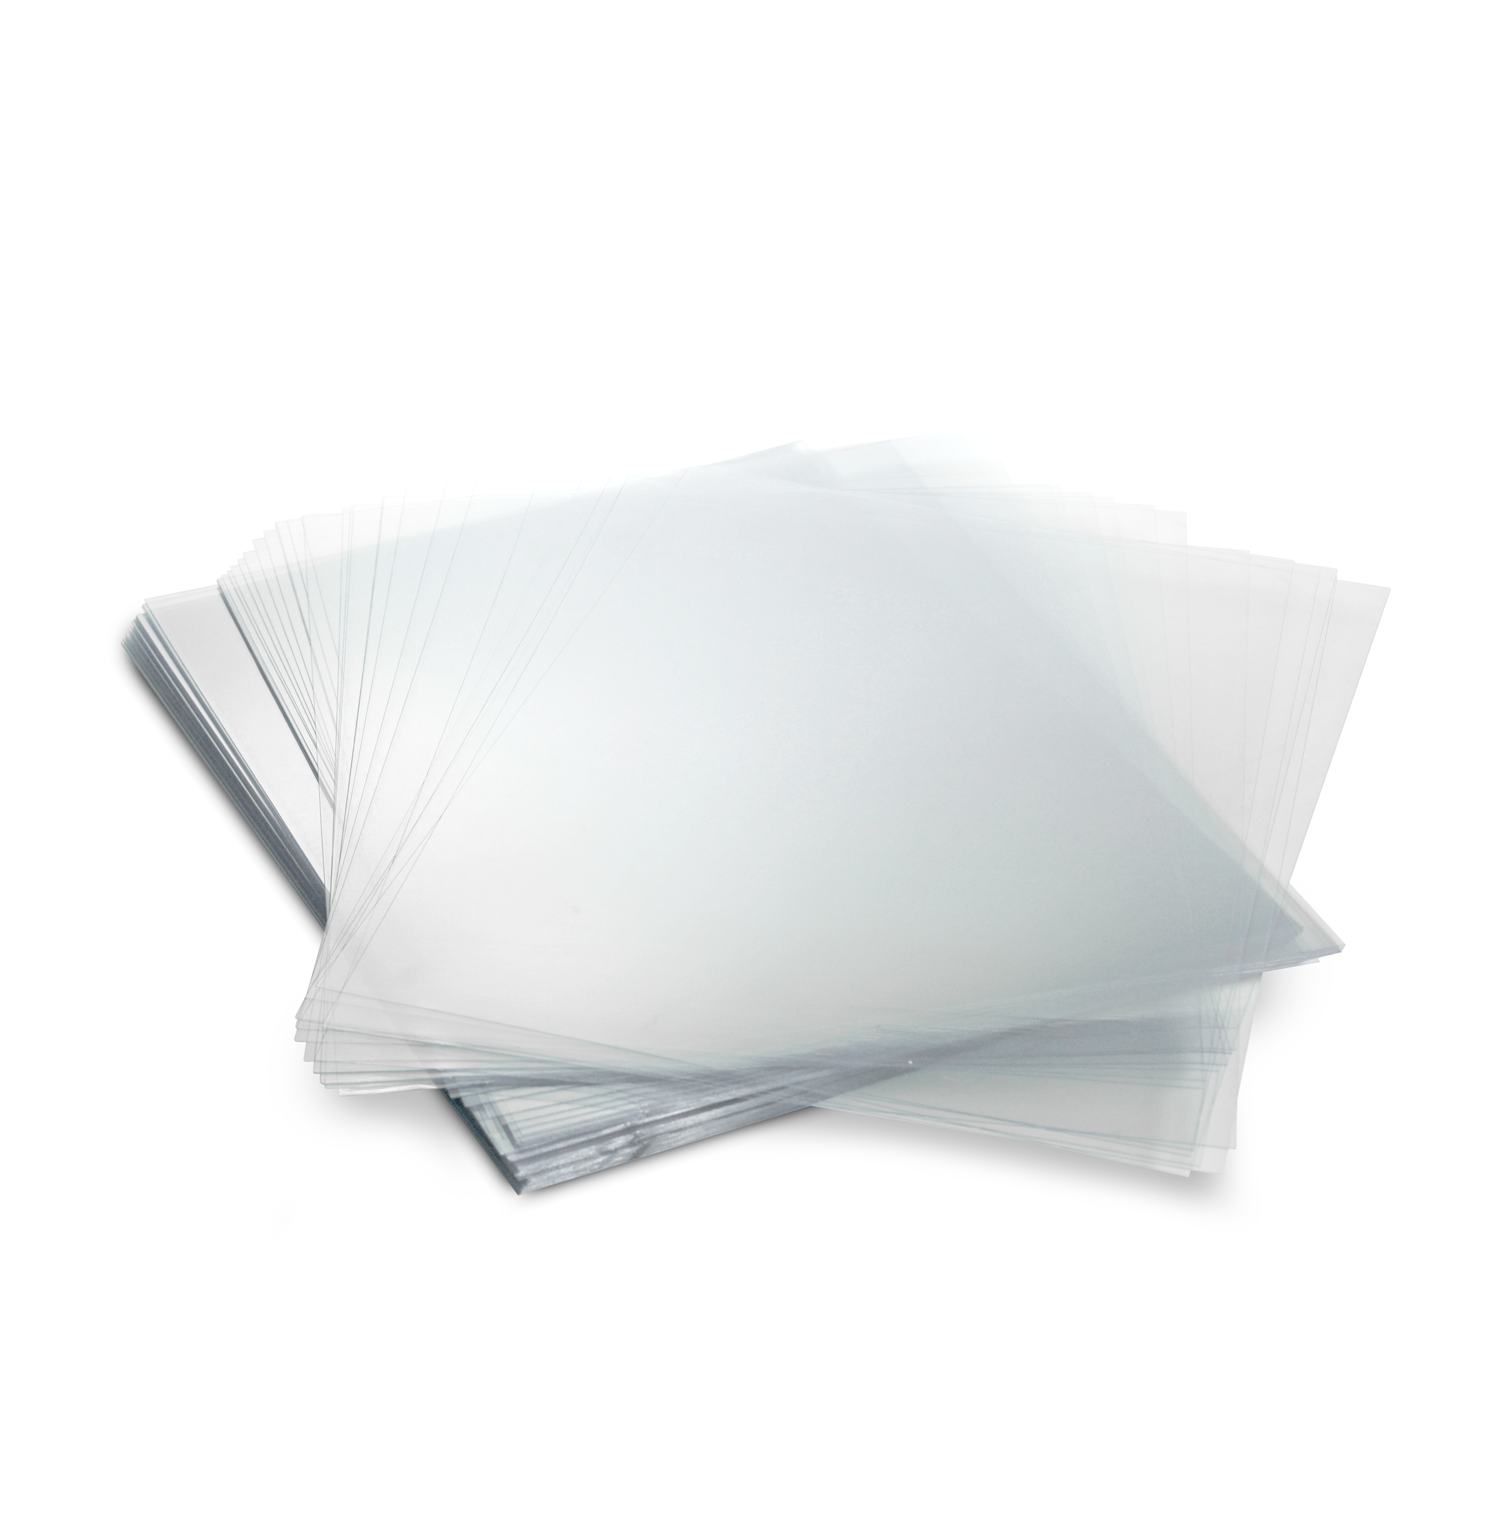 7 Mil Crystal Clear Binding Covers 8.5 x 11" Pack of 100 